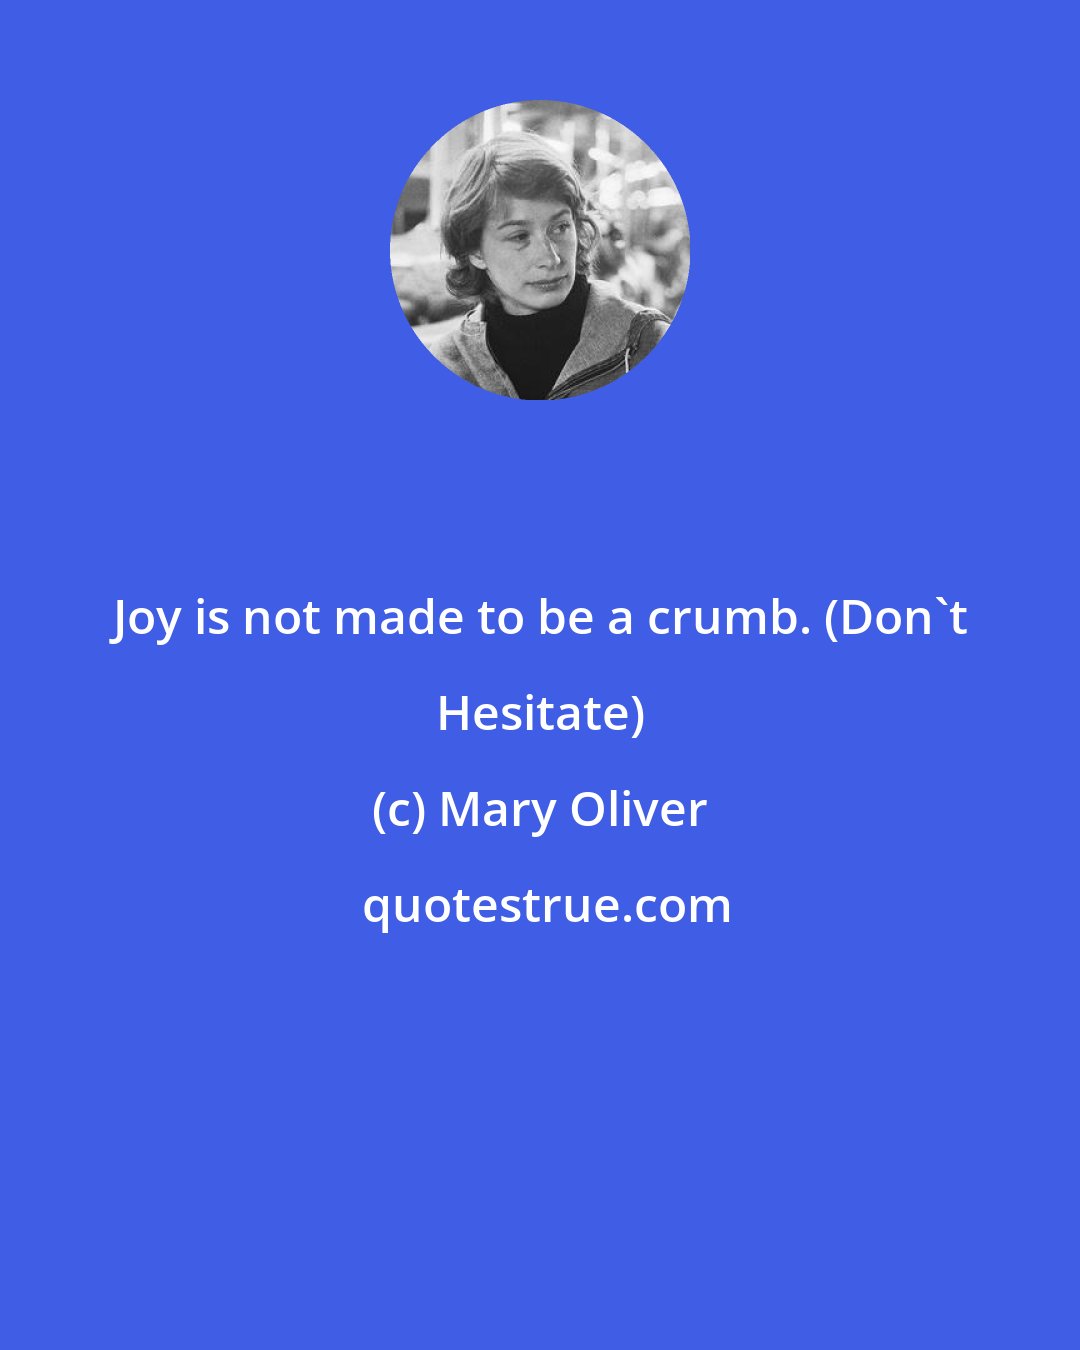 Mary Oliver: Joy is not made to be a crumb. (Don't Hesitate)